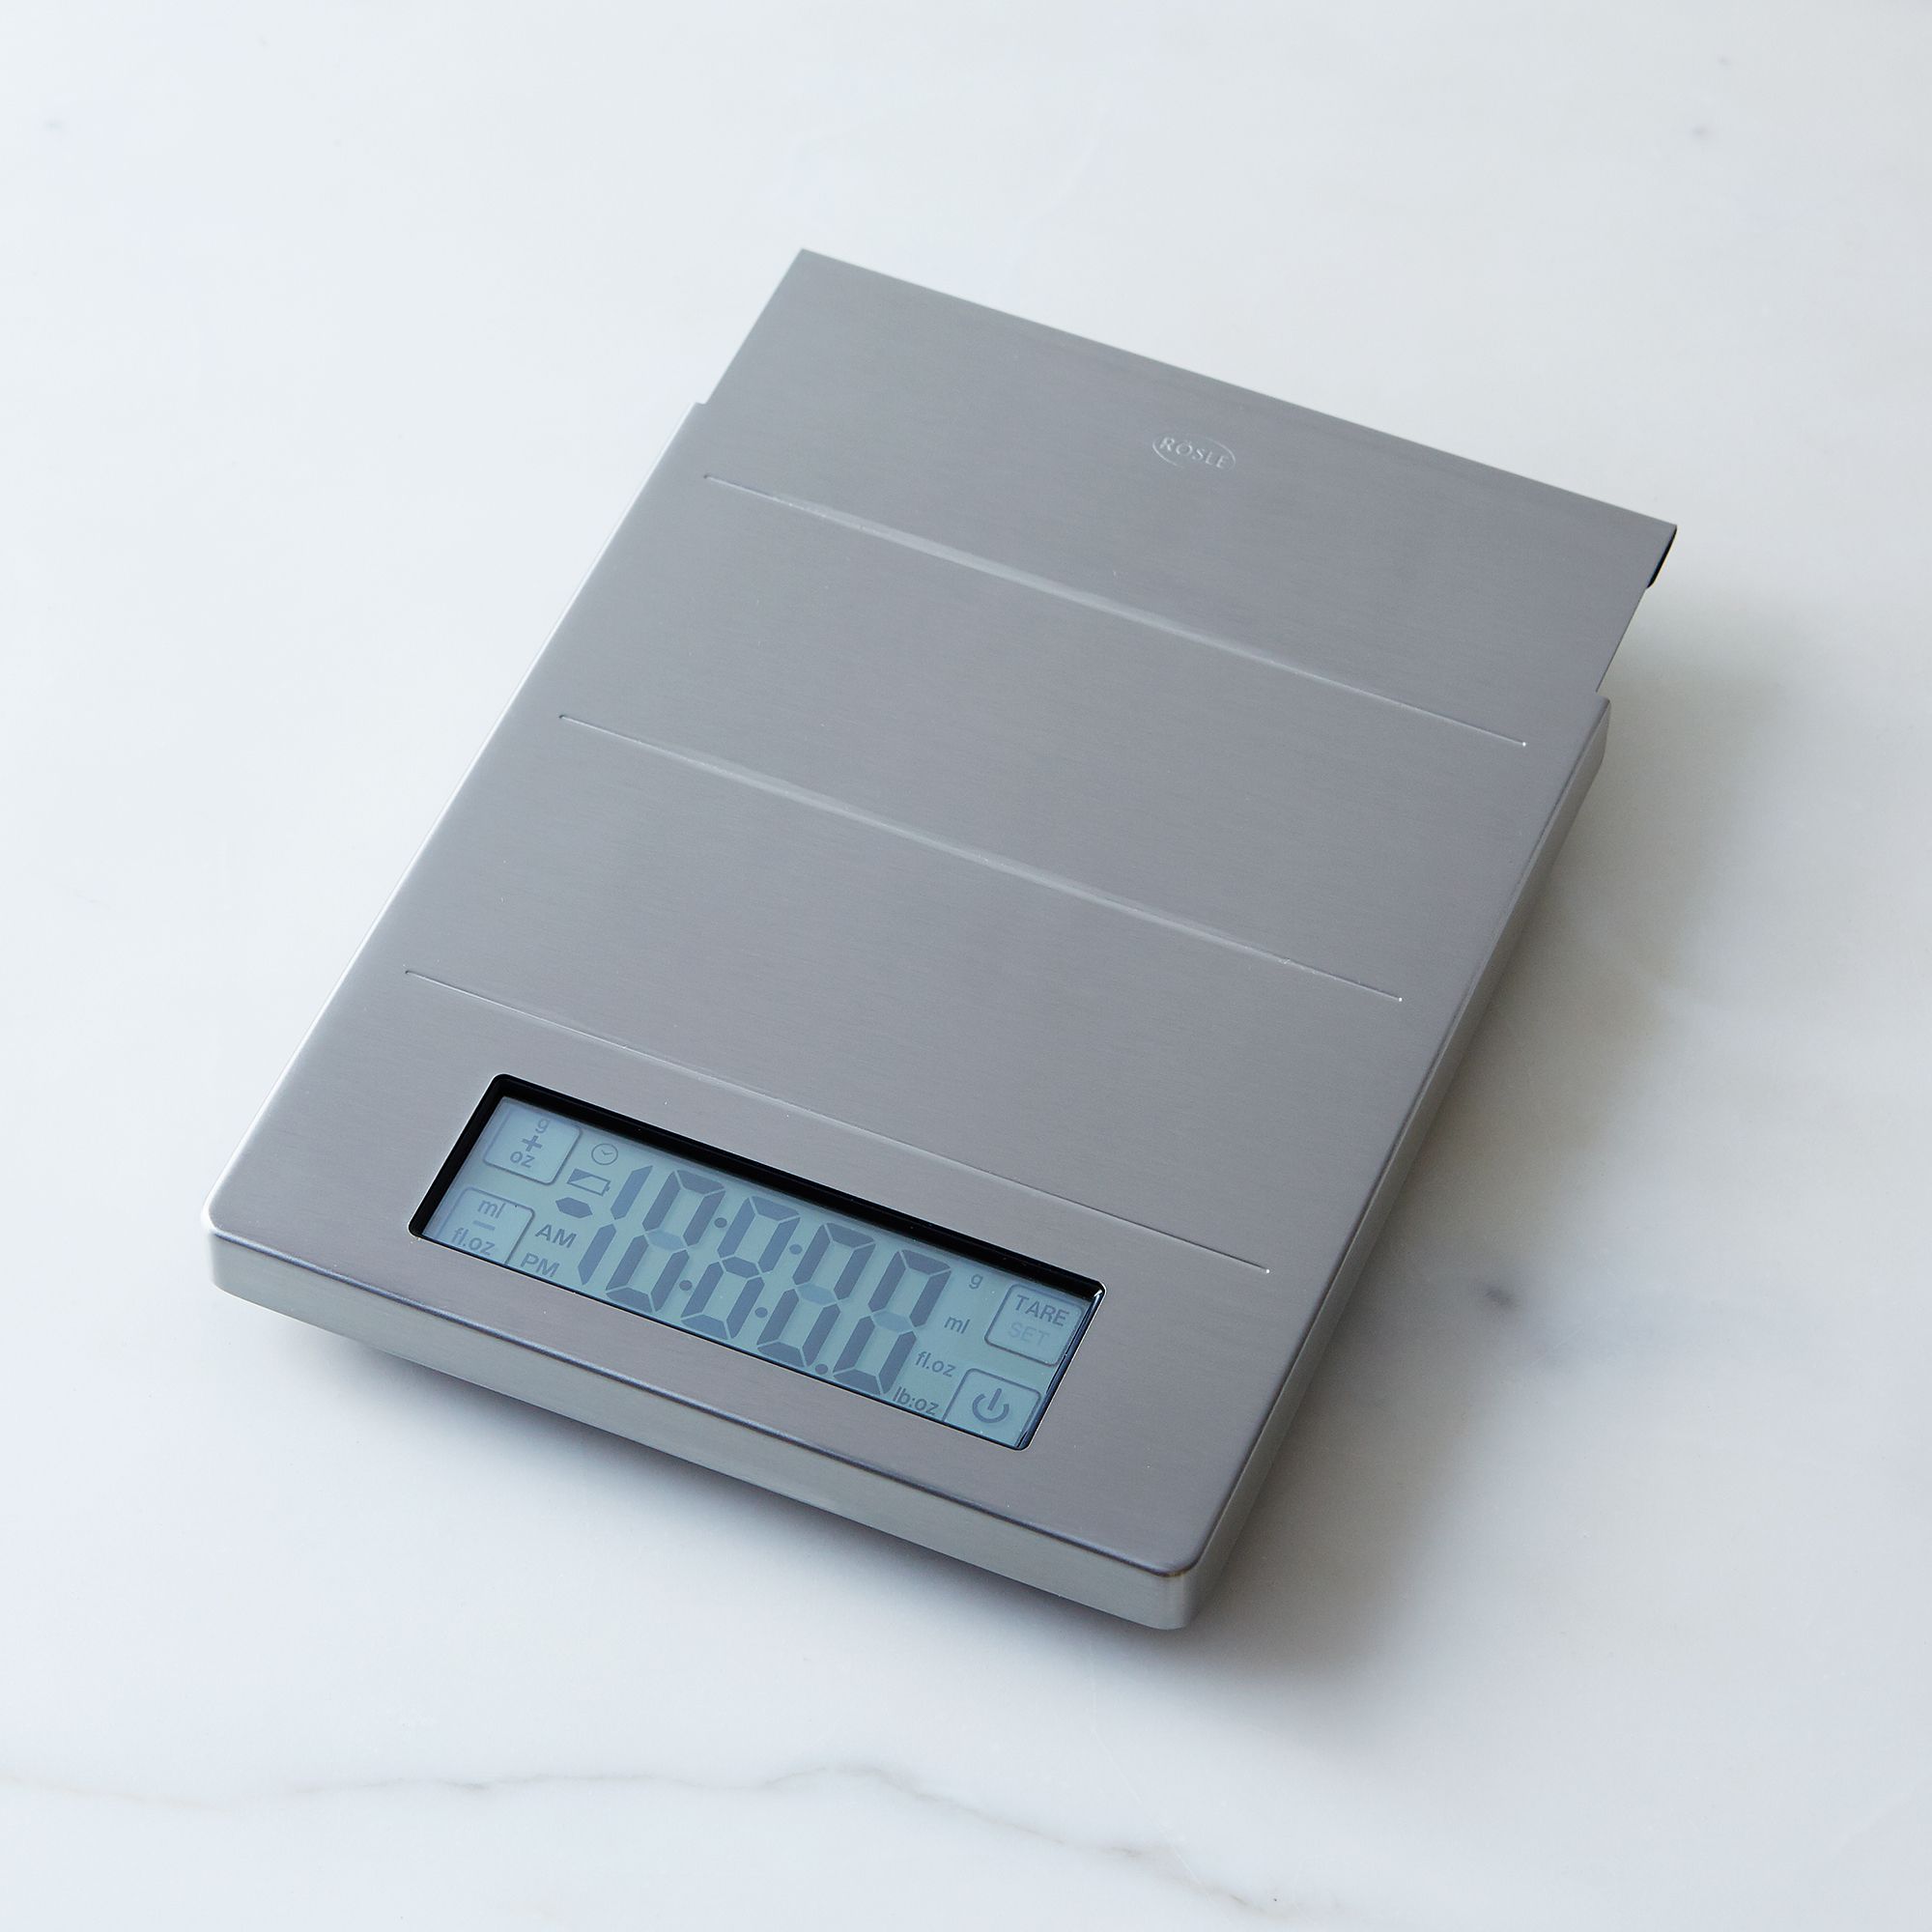 Digital Kitchen Scale And Clock On Food52